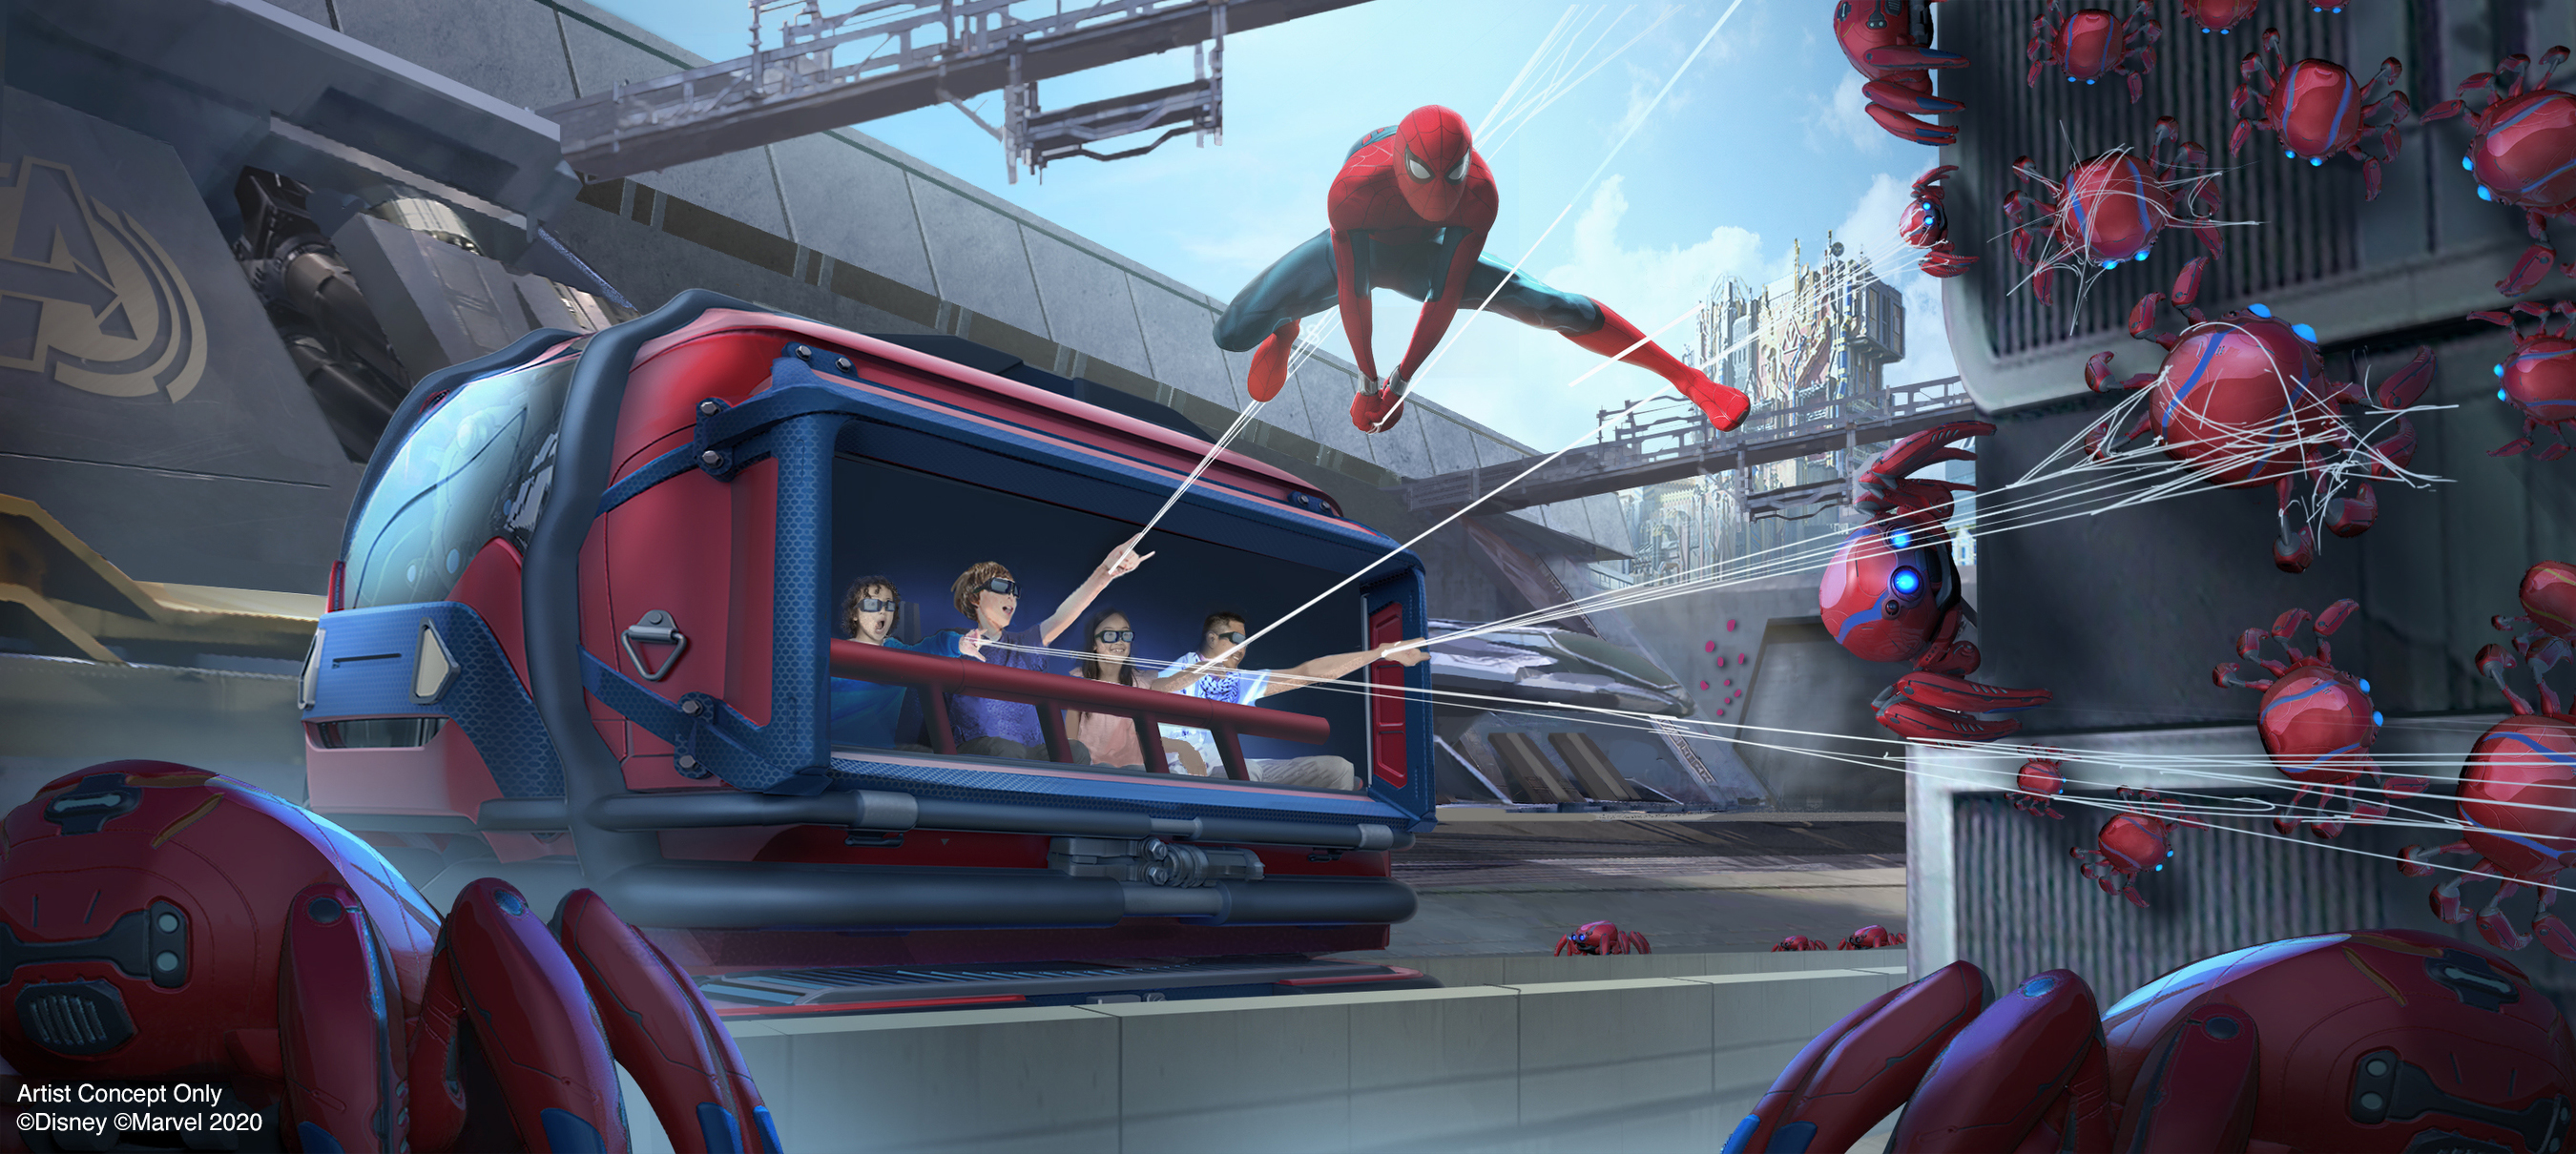 WEB SLINGERS: A Spider-Man Adventure in Avengers Campus at Disney California Adventure Park in Anaheim, California, will allow Super Hero recruits to put their web-slinging skills to the test as they team up with Spider-Man to capture his out-of-control Spider-Bots before they wreak havoc on the Campus. Avengers Campus opens summer 2020. (Disneyland Resort)